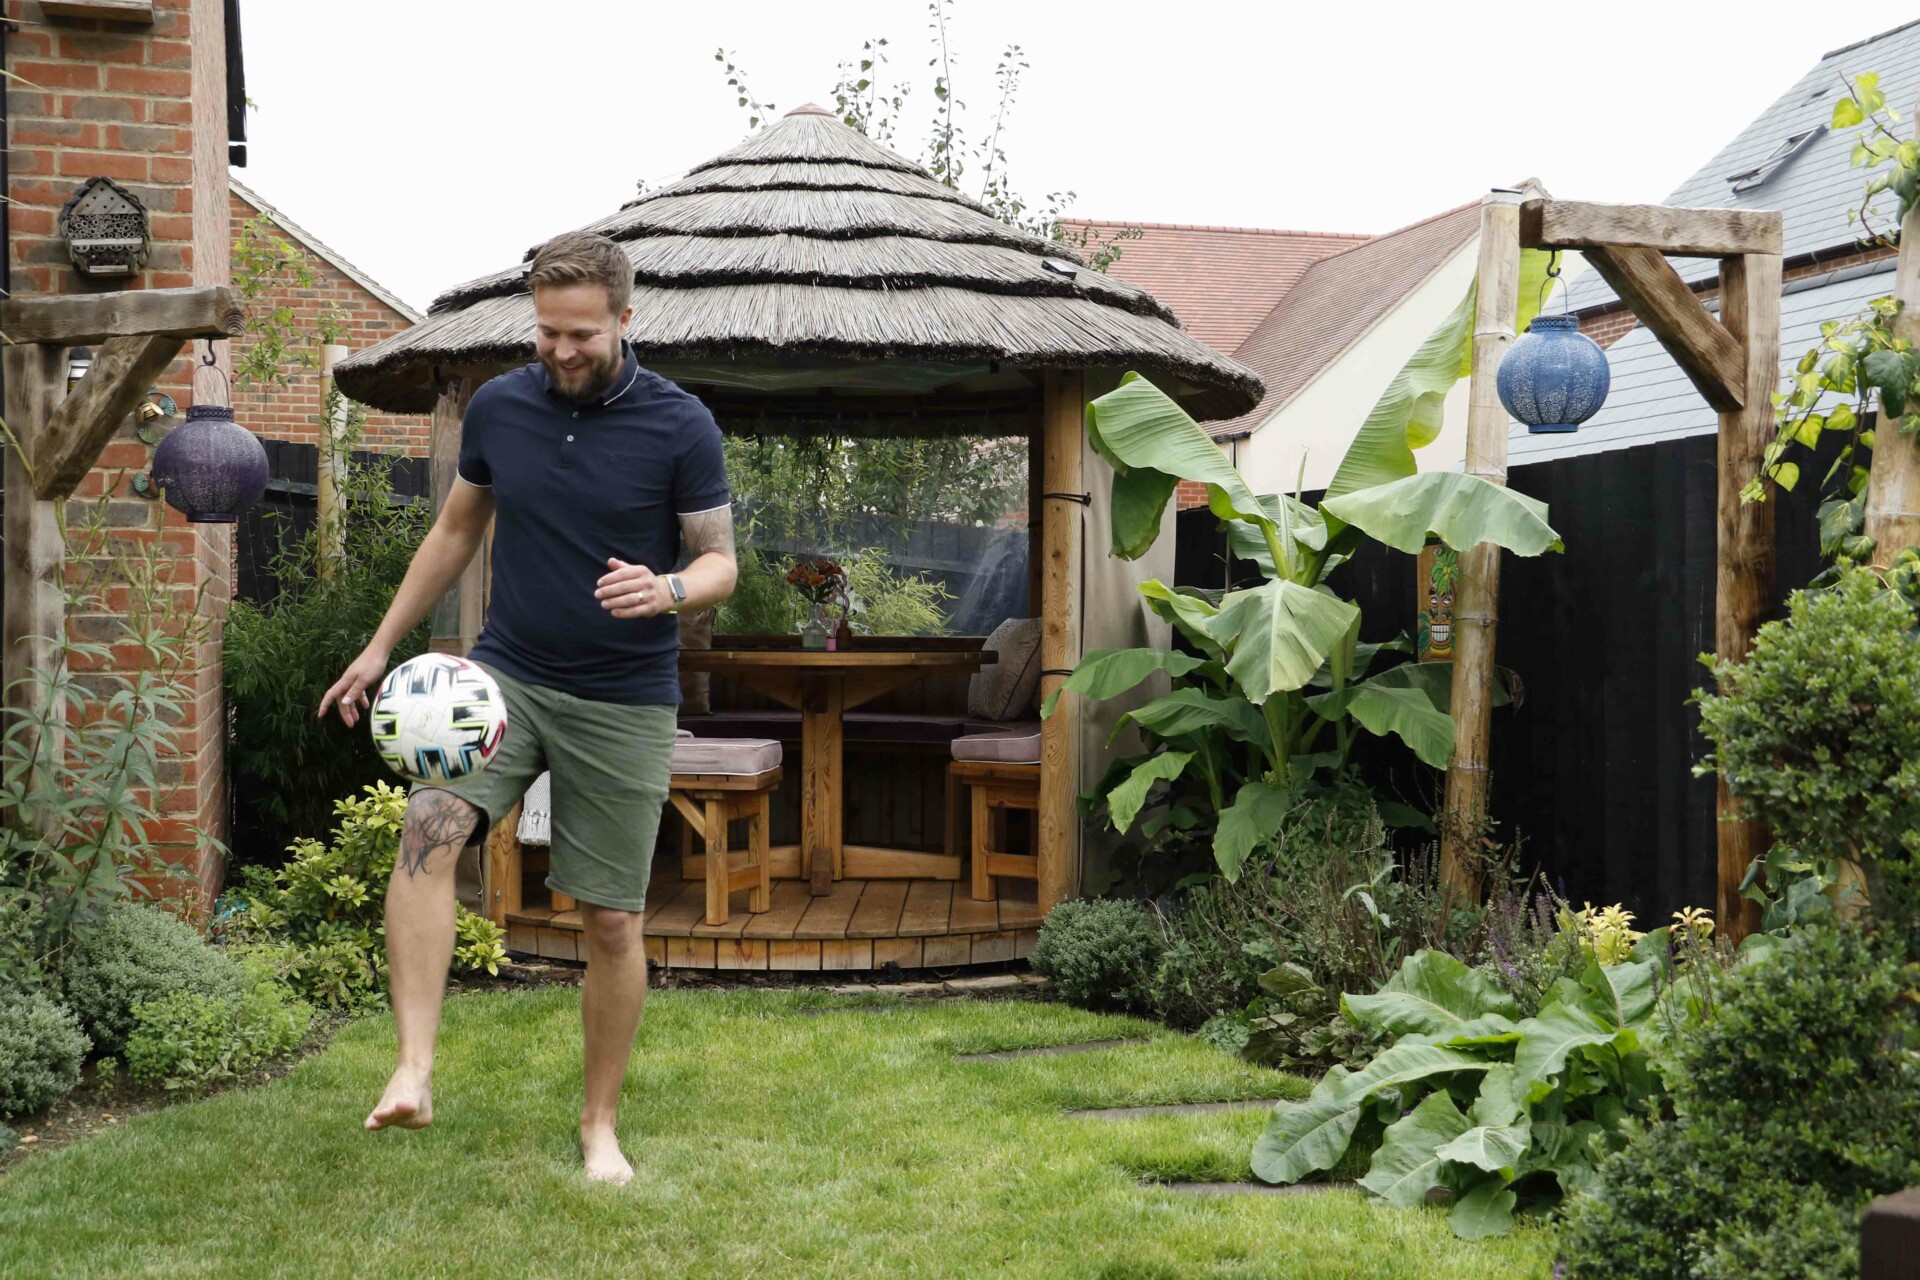 Adam practising his football skills in front of the newly installed Breeze House after ITV's Love Your Garden transformation.